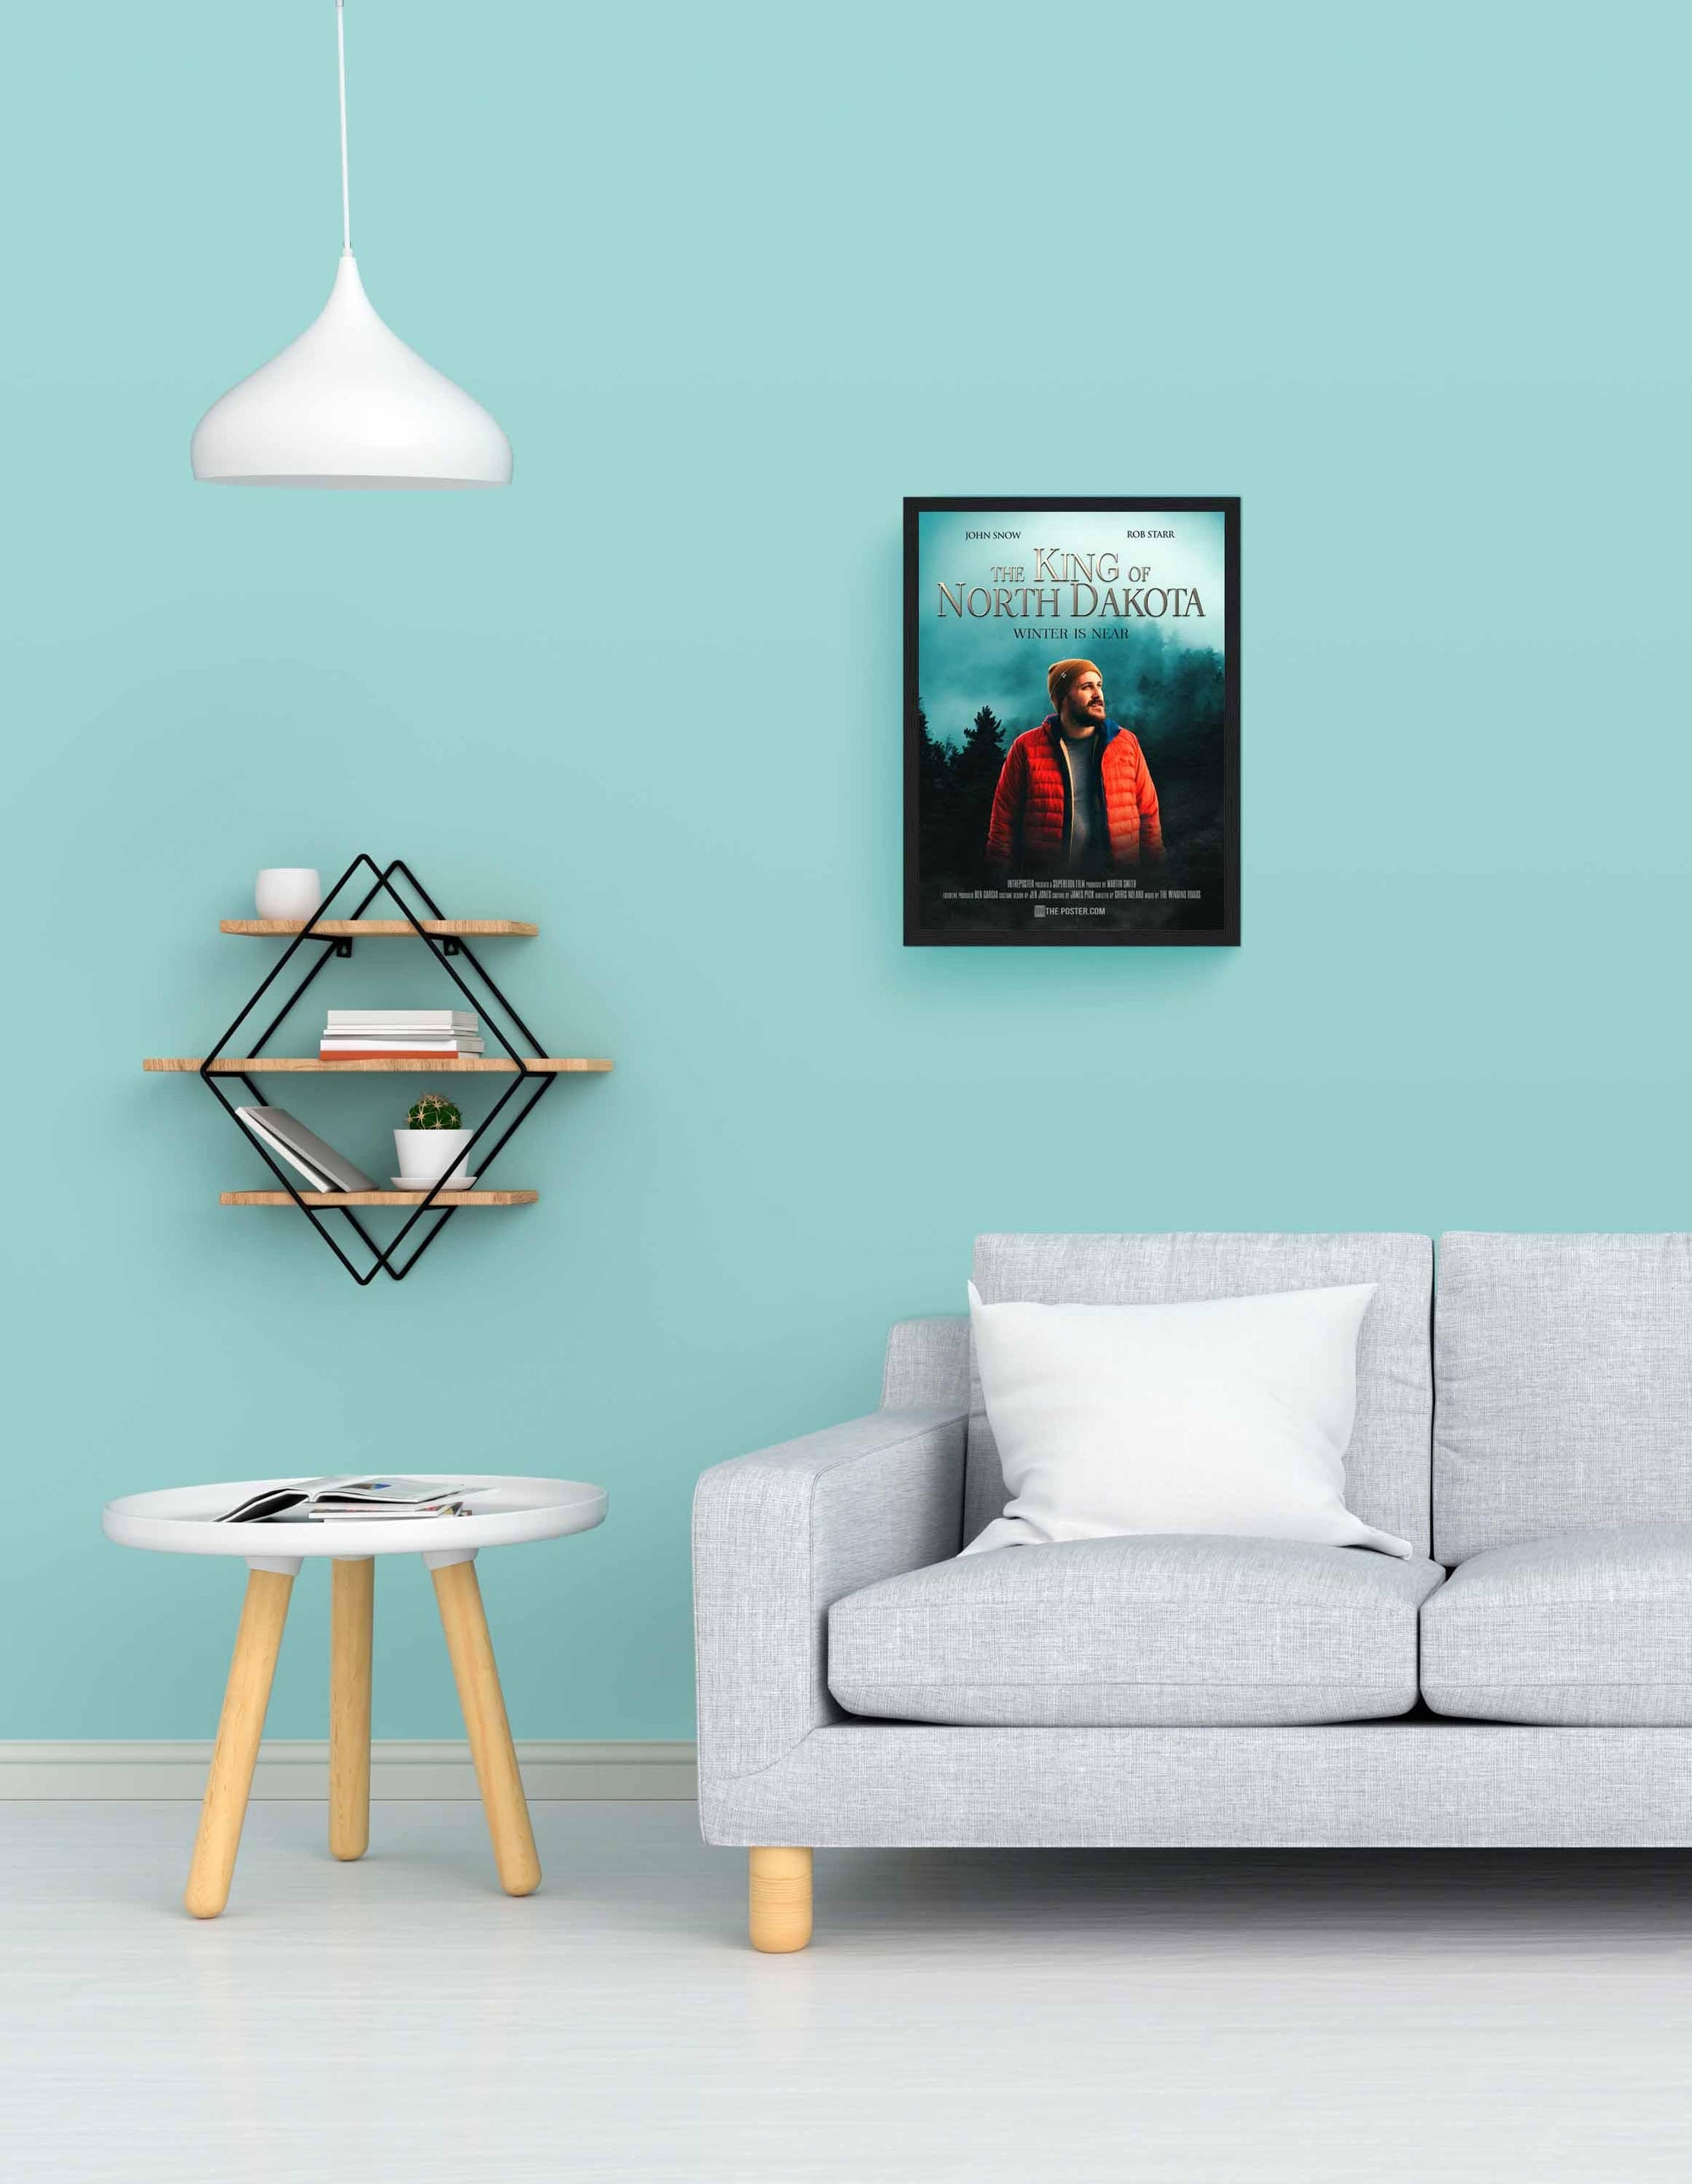 Fantasy custom movie poster in a black small frame on a blue wall above a grey sofa